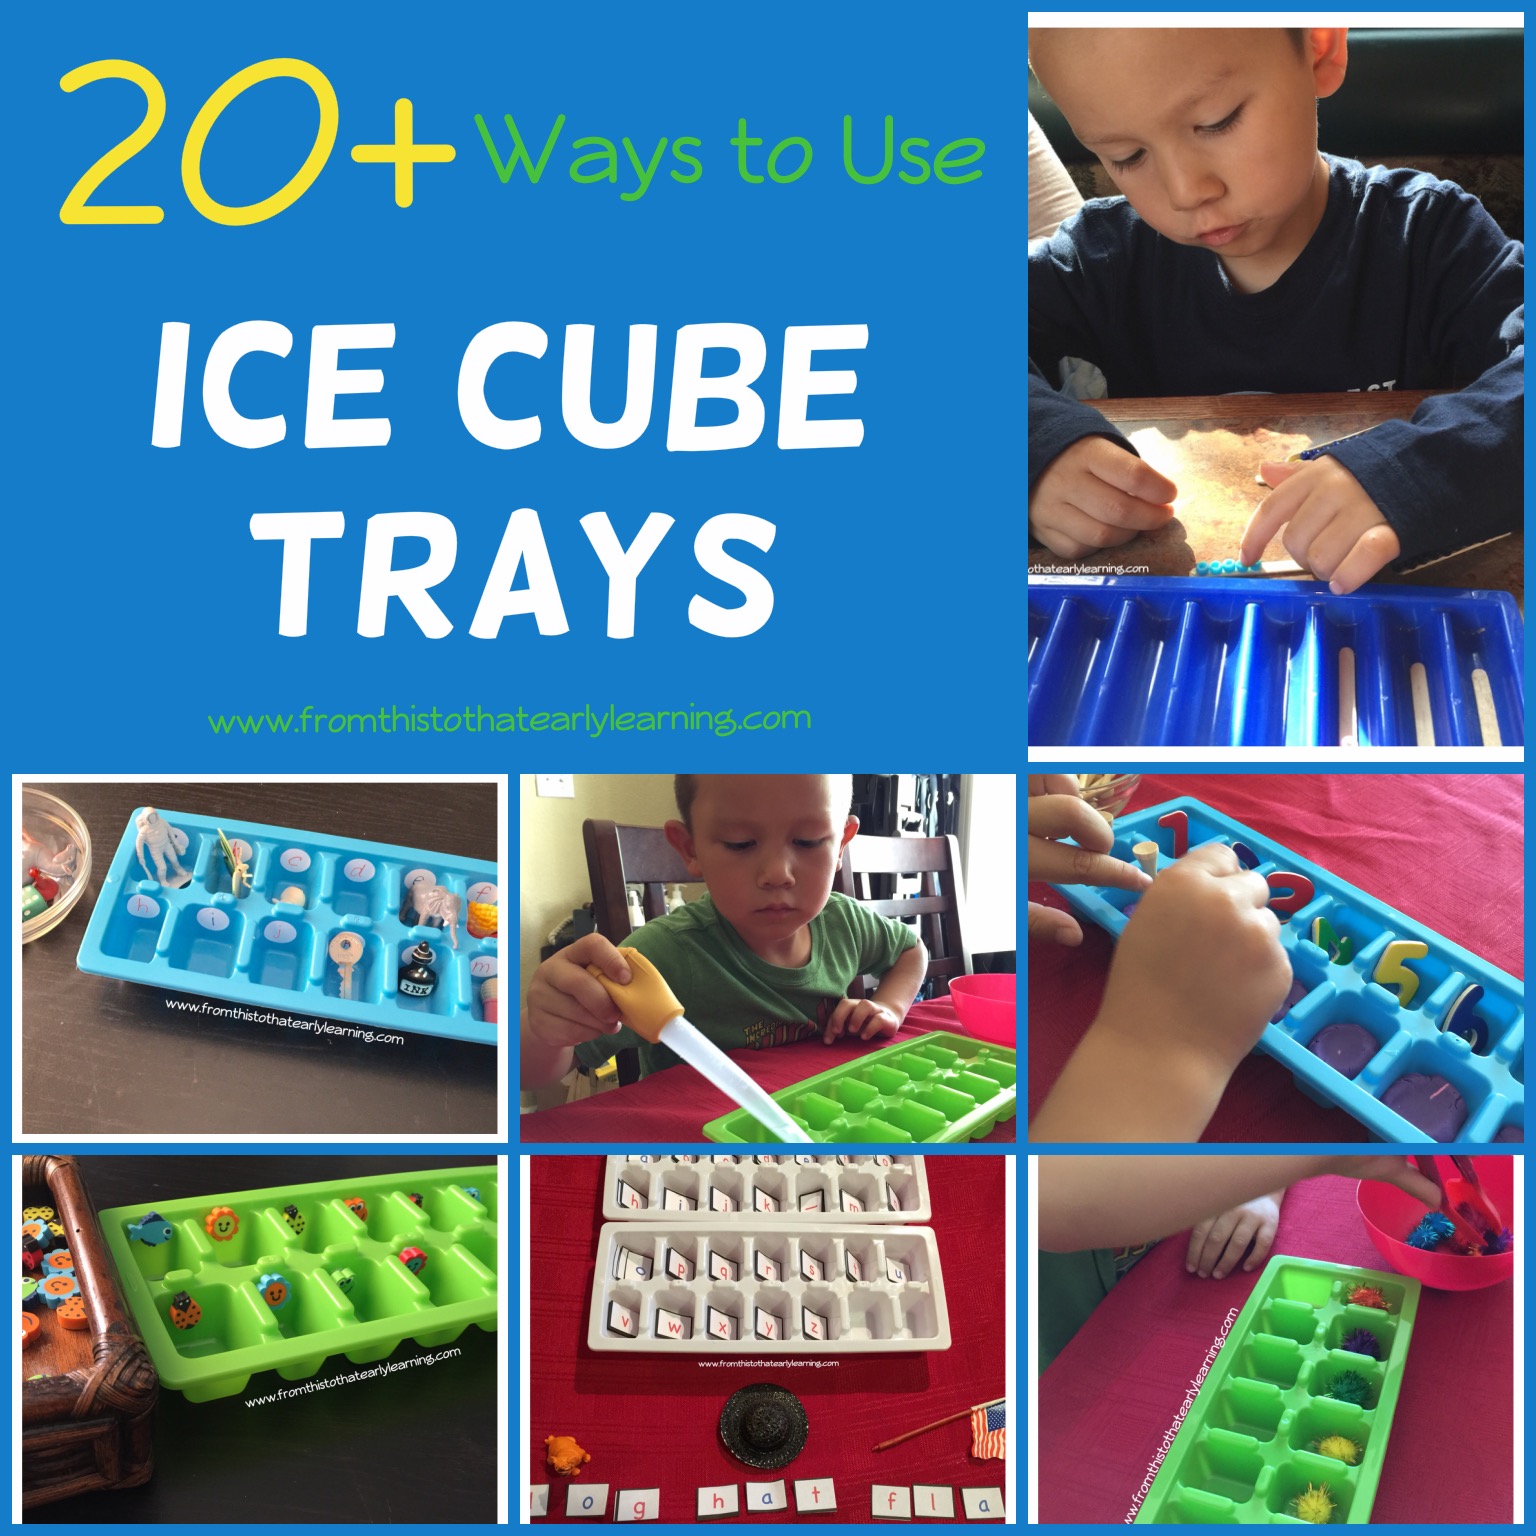 Unique Ice Cube Tray Hacks DIY Projects Craft Ideas & How To's for